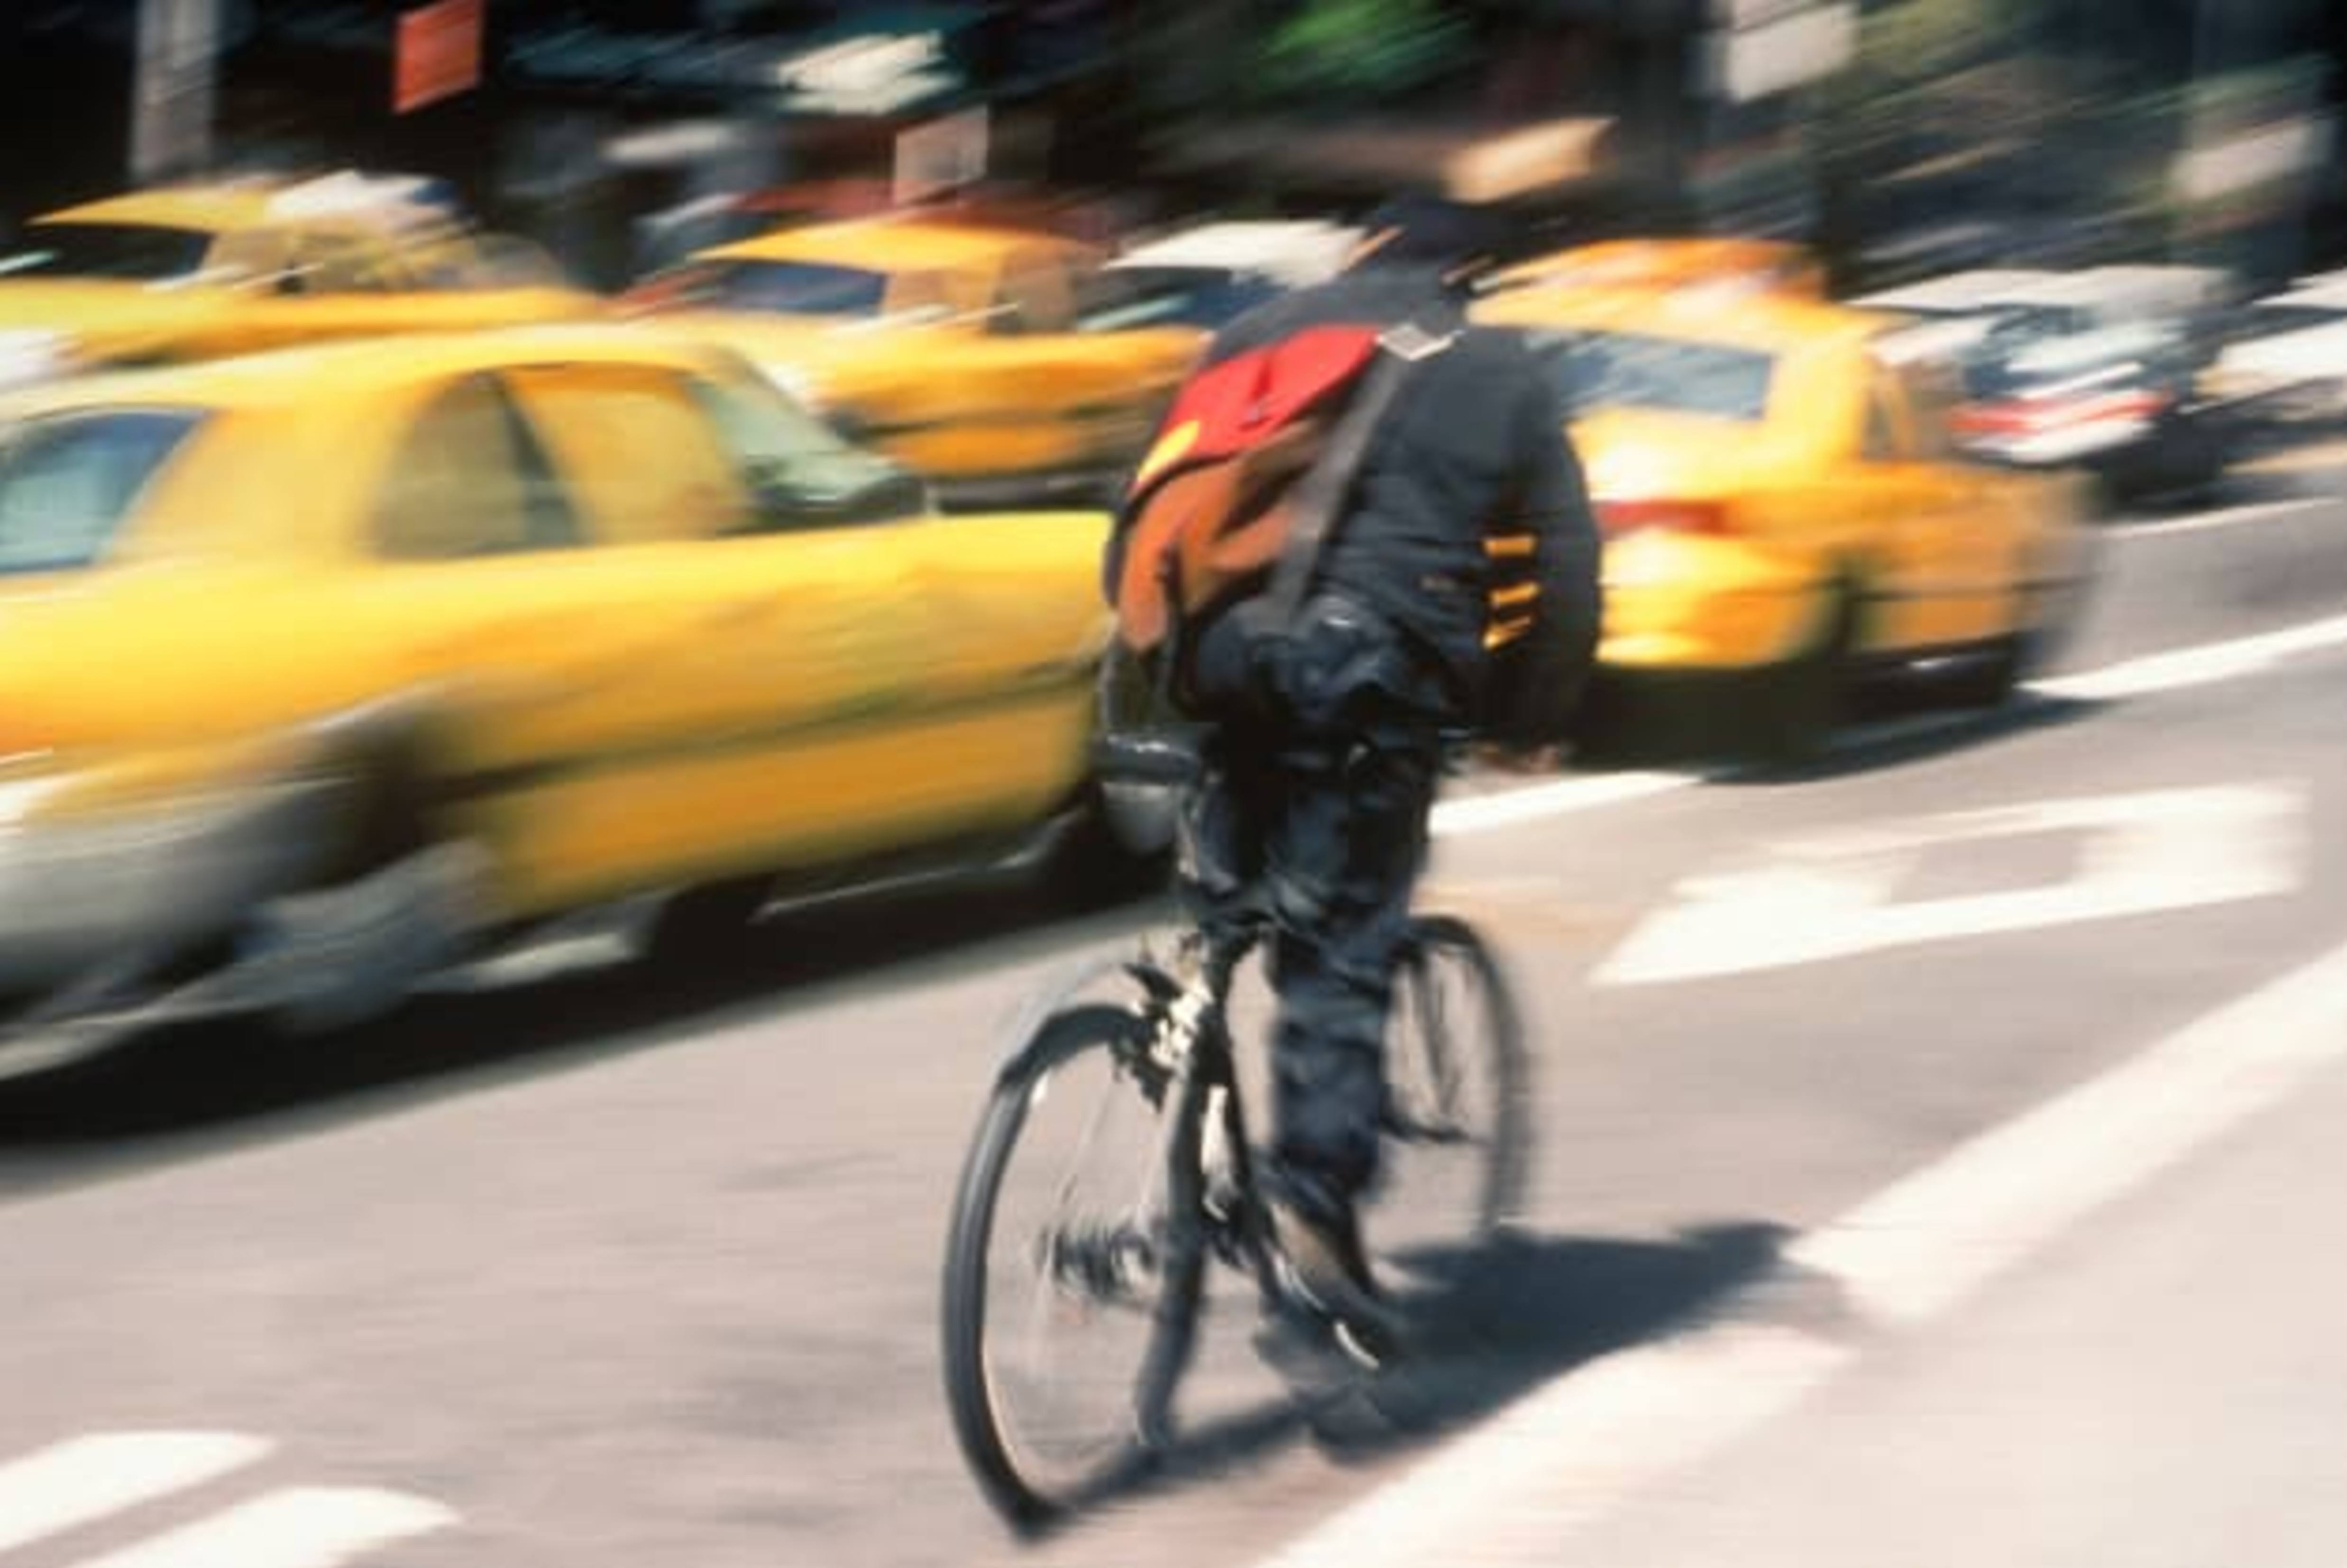 USA New York Bike Messenger Making Delivery Through Traffic on a City Street